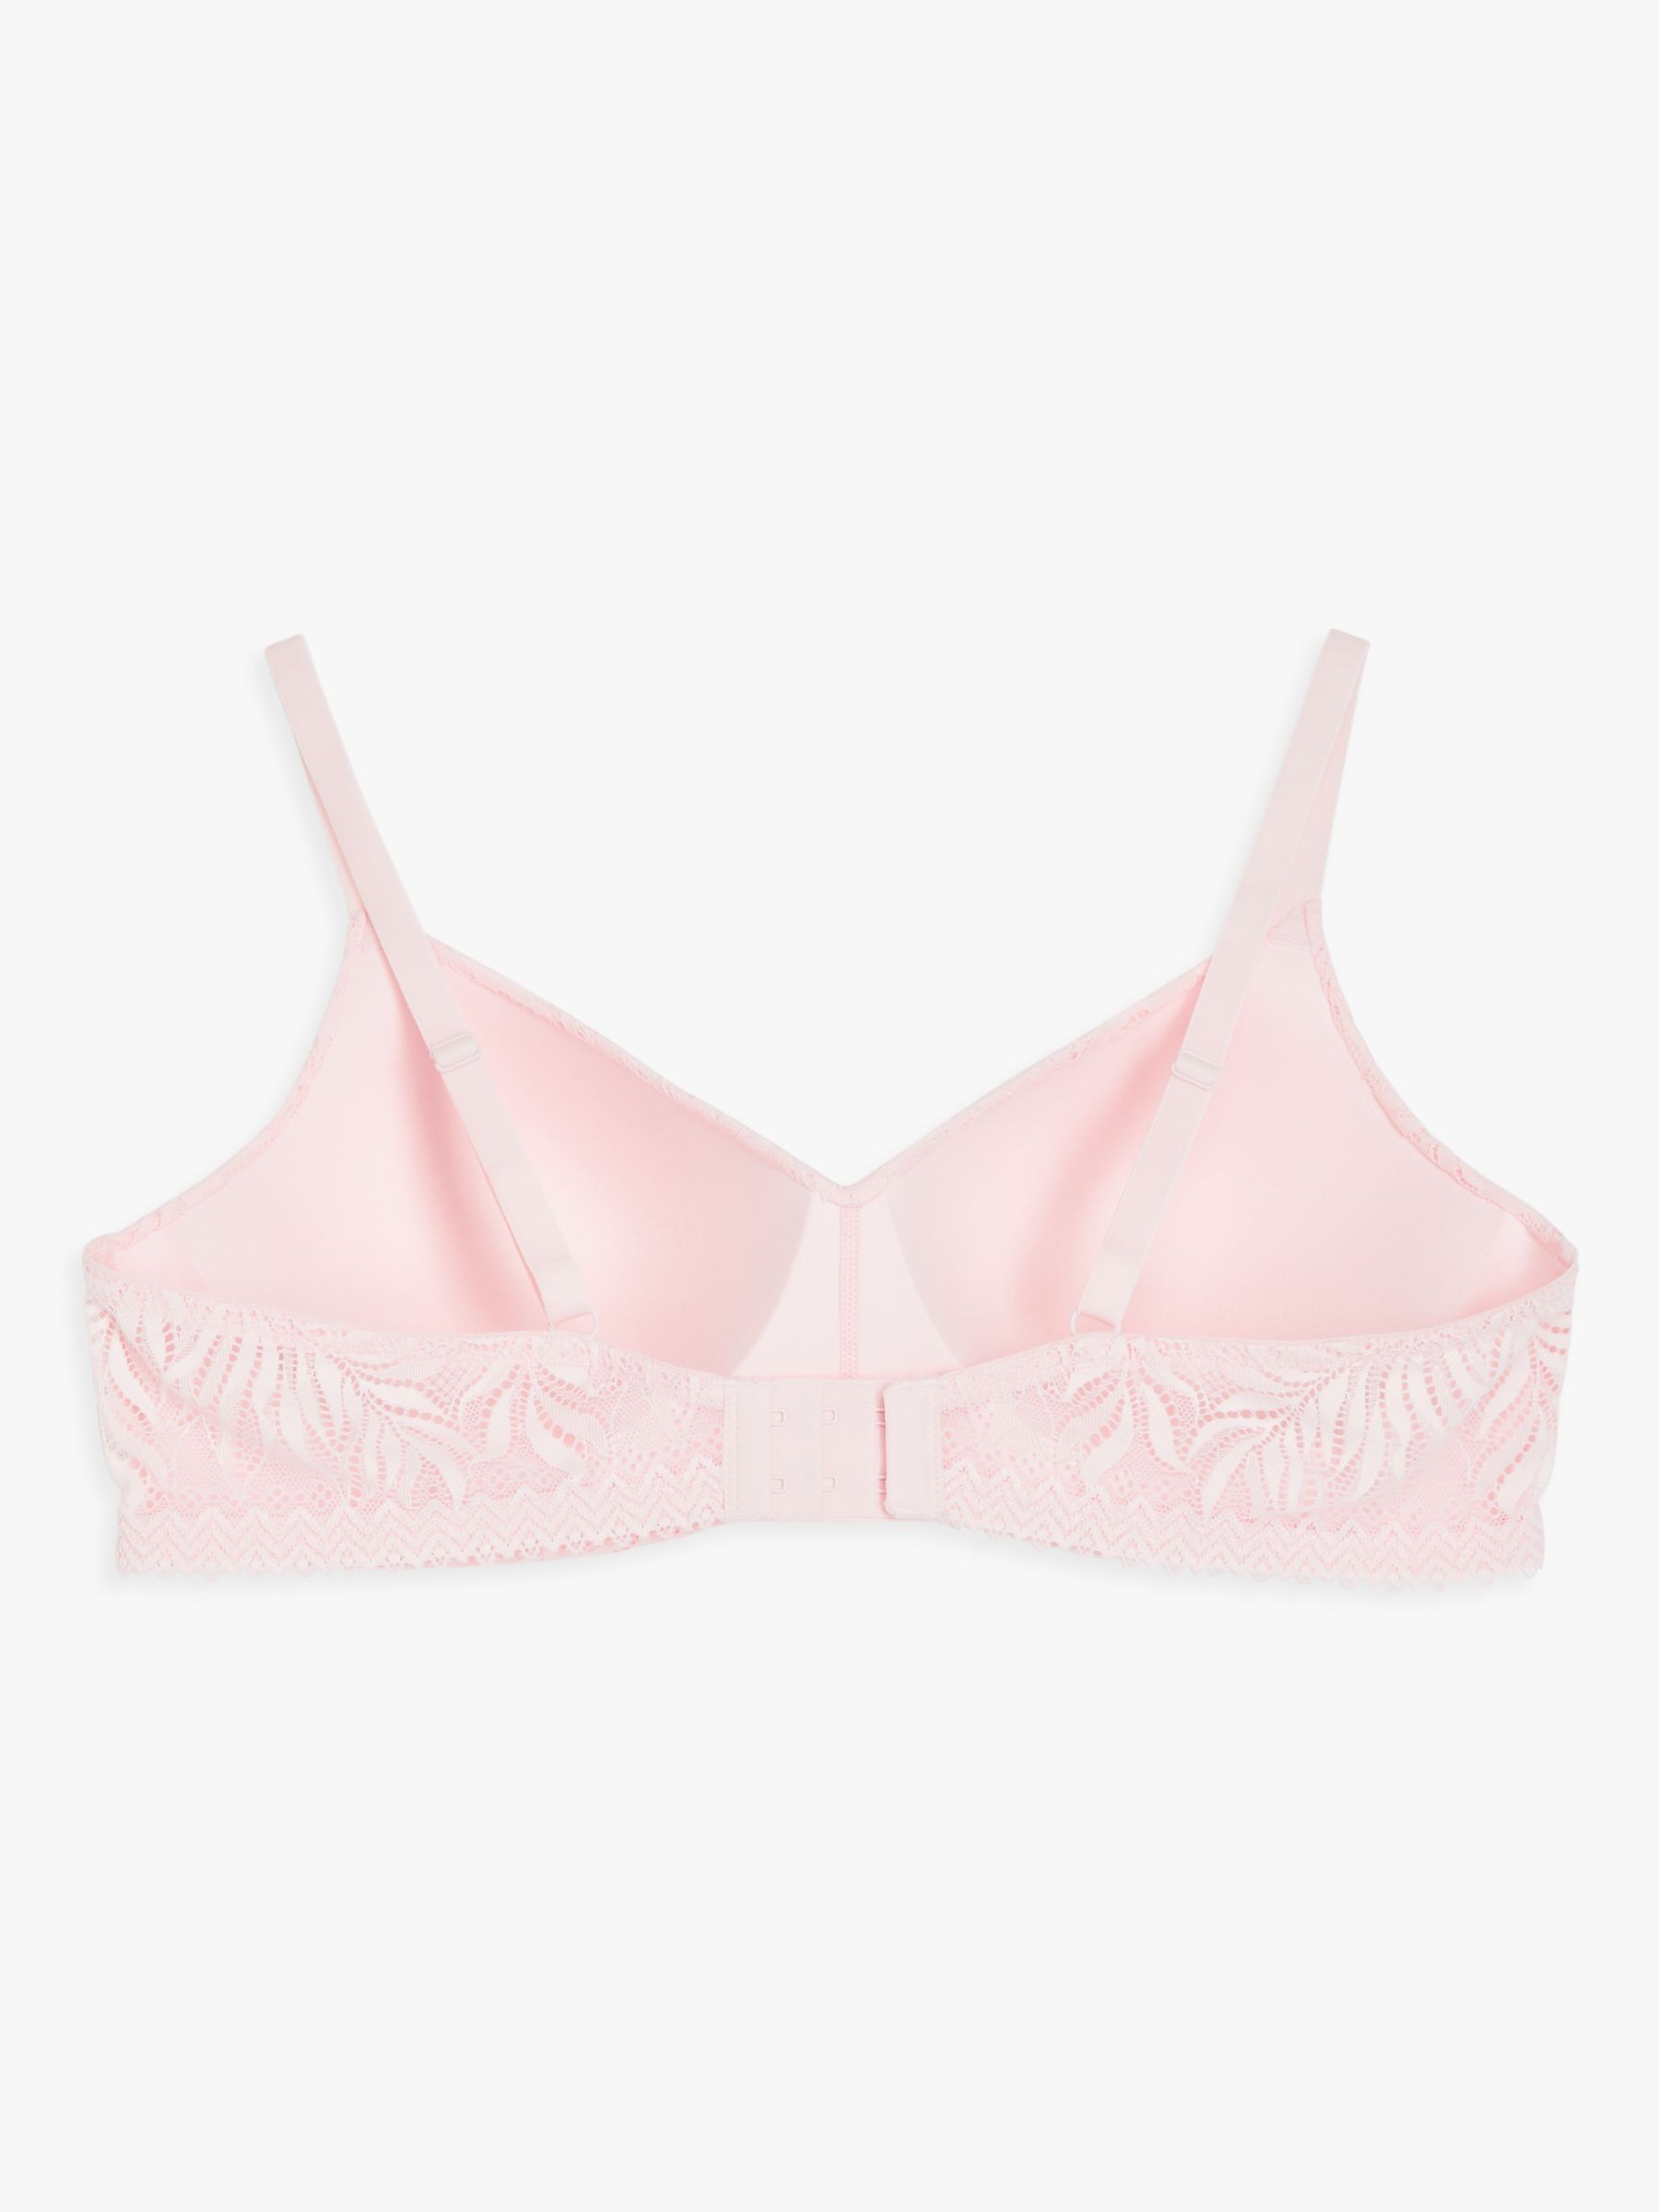 Buy EROTISSCH Pink Lace Non-Wired Non Padded Everyday Bra